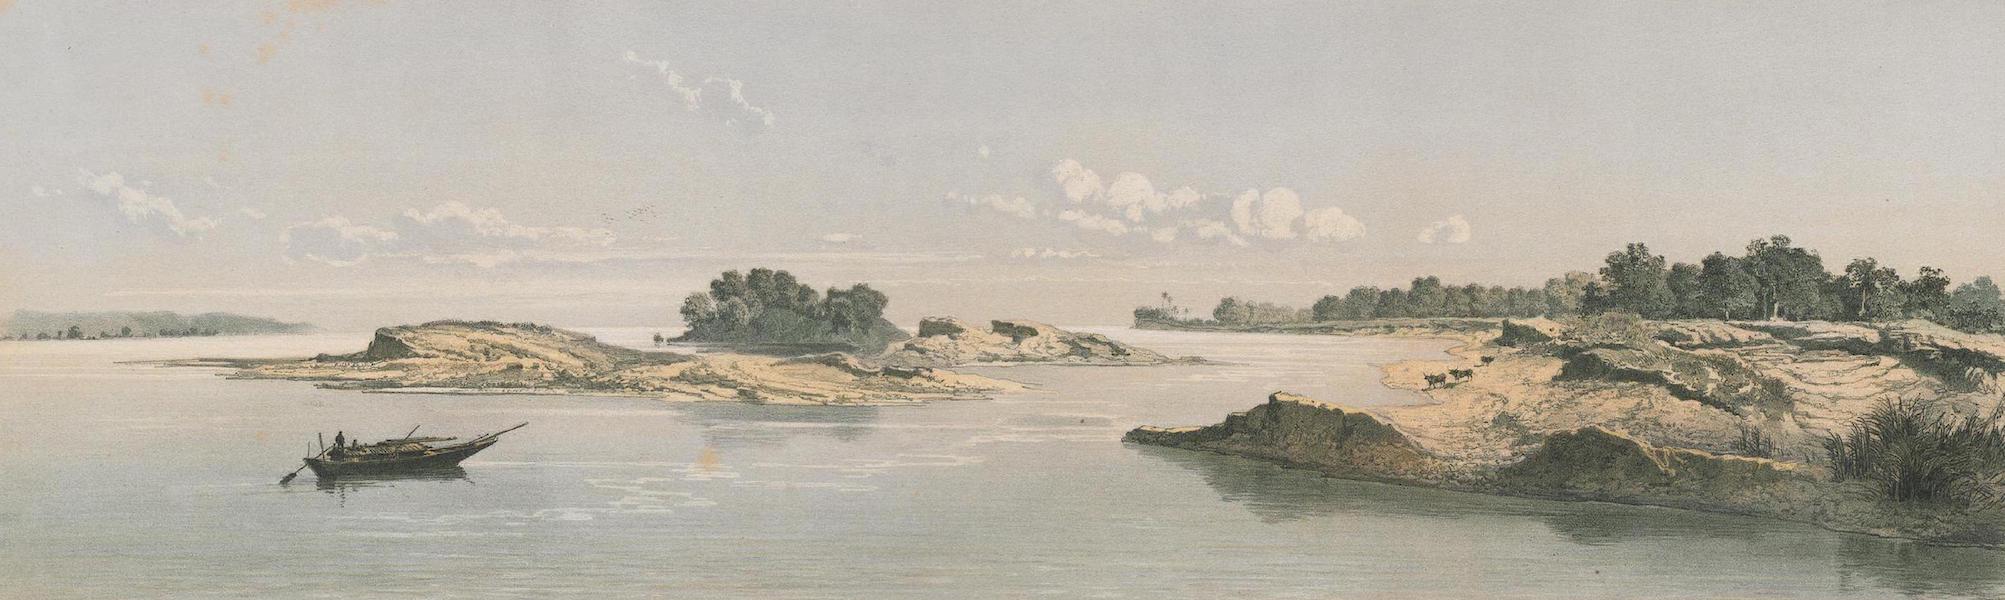 Results of a Scientific Mission to India and High Asia Atlas - Alluvial Deposits in the Brahmaputra Above Rakusni Hill Assam (1866)